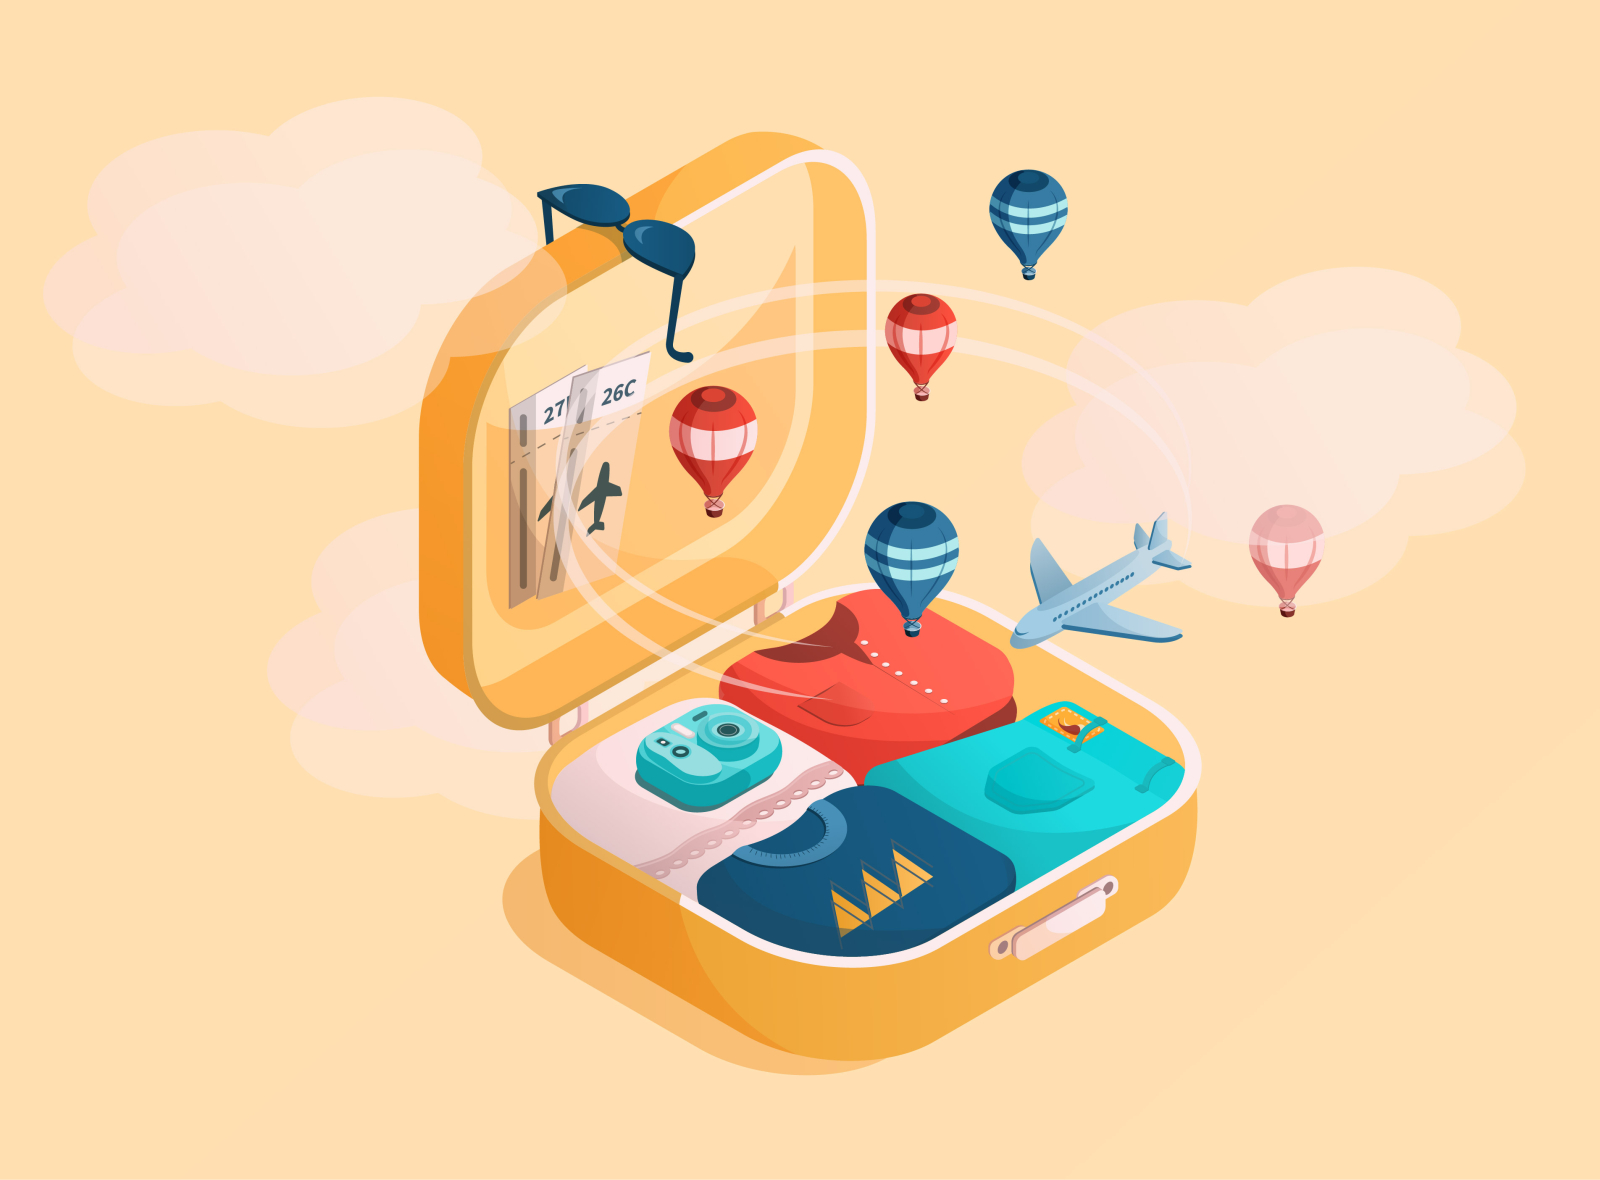 Travelling adobe illustrator airplane camera illustration isometric isometry plans suitcase tickets travel traveling trip vector